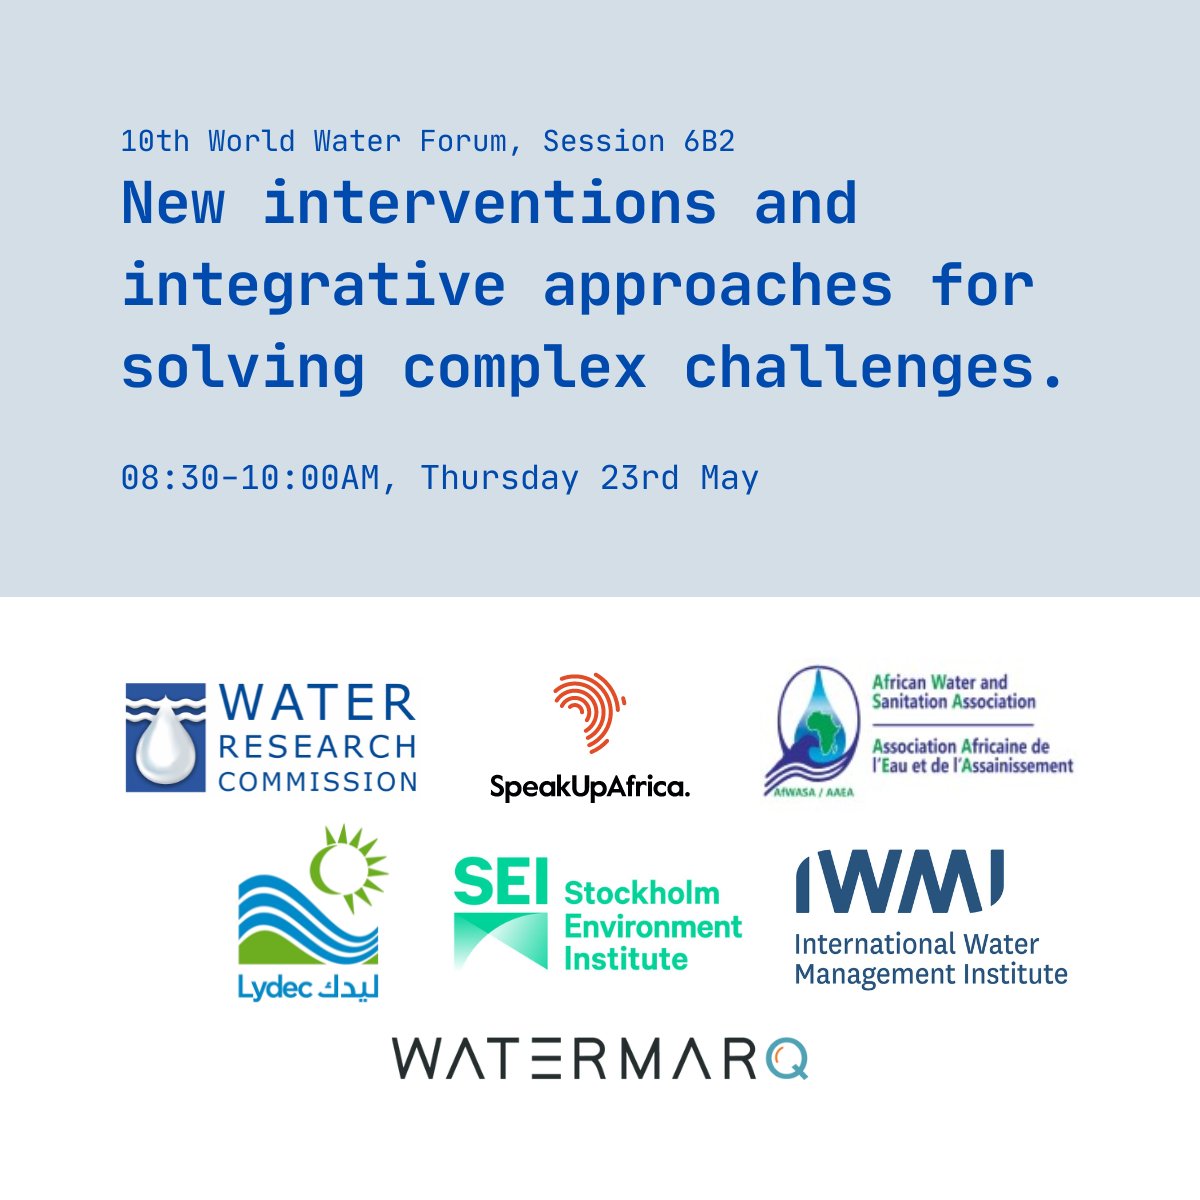 Exciting conversation alert! Join us at the 10th #WorldWaterForum to explore innovative approaches in water and sanitation management with case studies from our partners: @WaterResearchSA, @AfWASA_AAEA, @lydecweb @SEIresearch, @IWMI_ and #Watermarq. #SDG6 #GoldenSludge